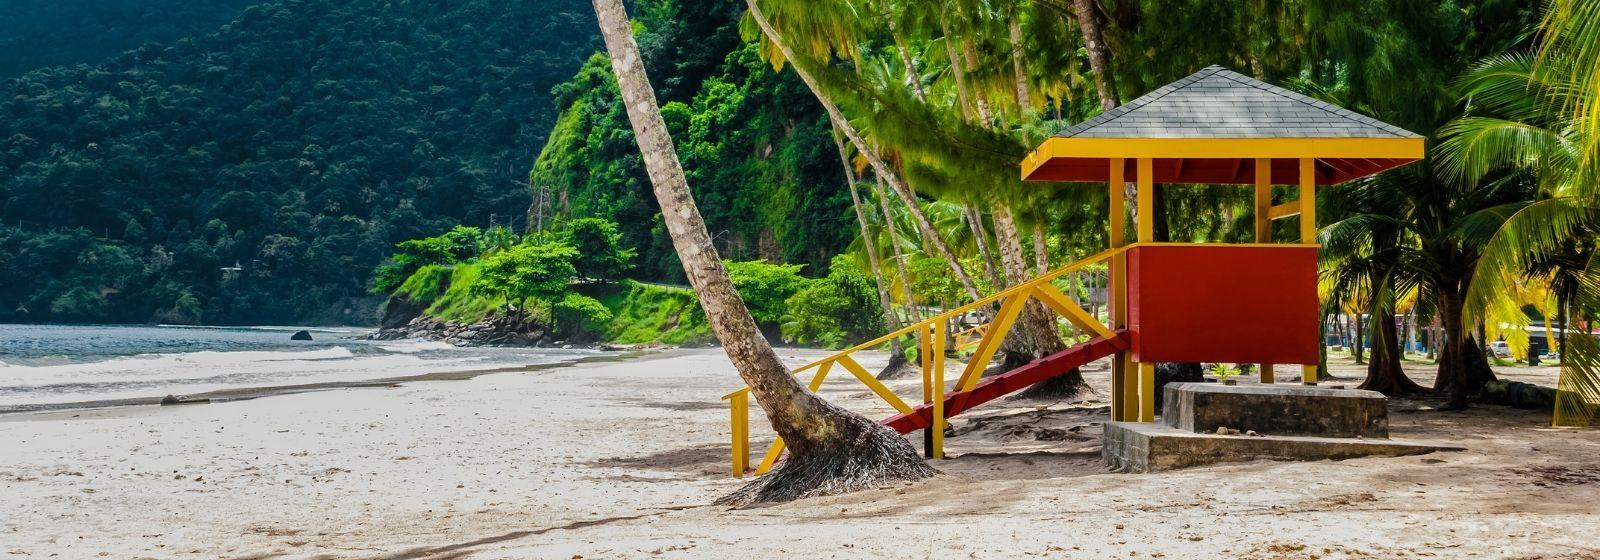 Discover Trinidad: The Best Place To Relax In The Caribbean